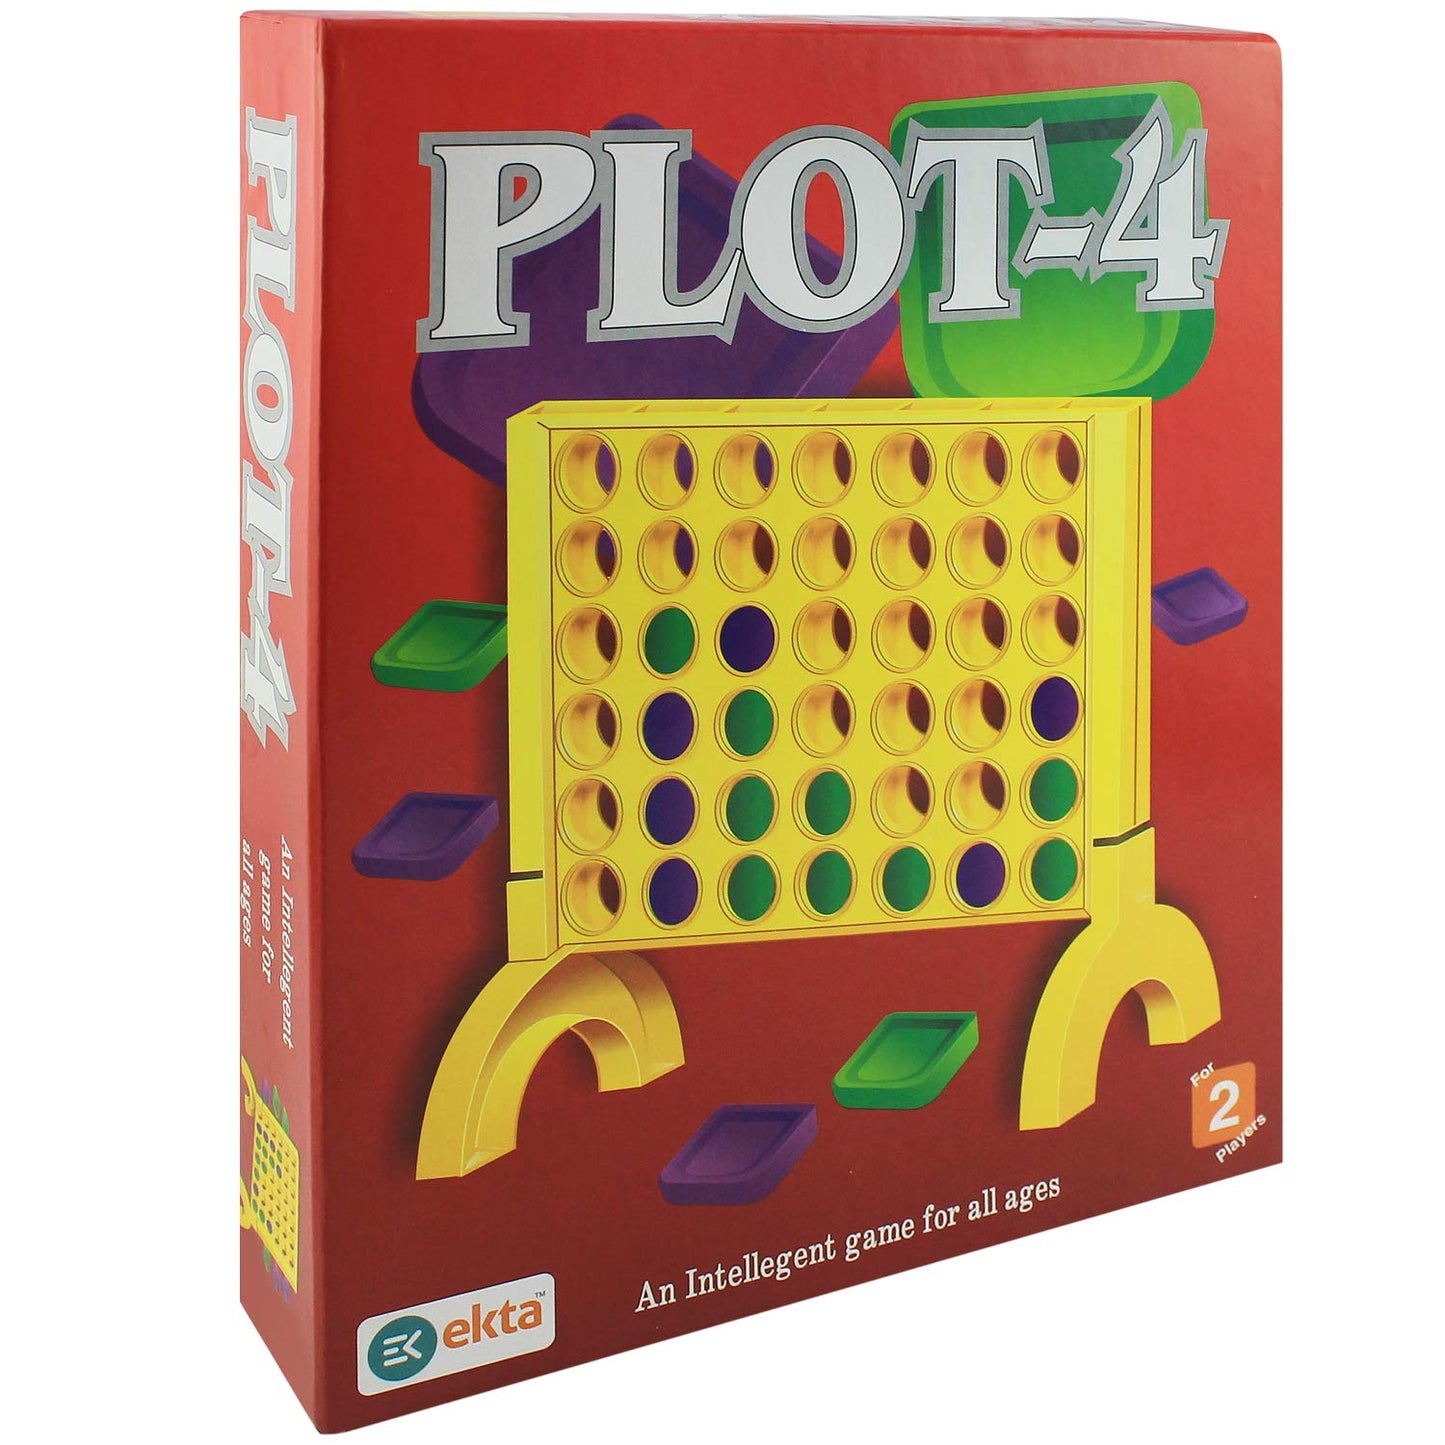 Ekta Plot-4 Family Game For 5+ Year Kids And Adult 2 Players Game Plastic Material - Multicolor